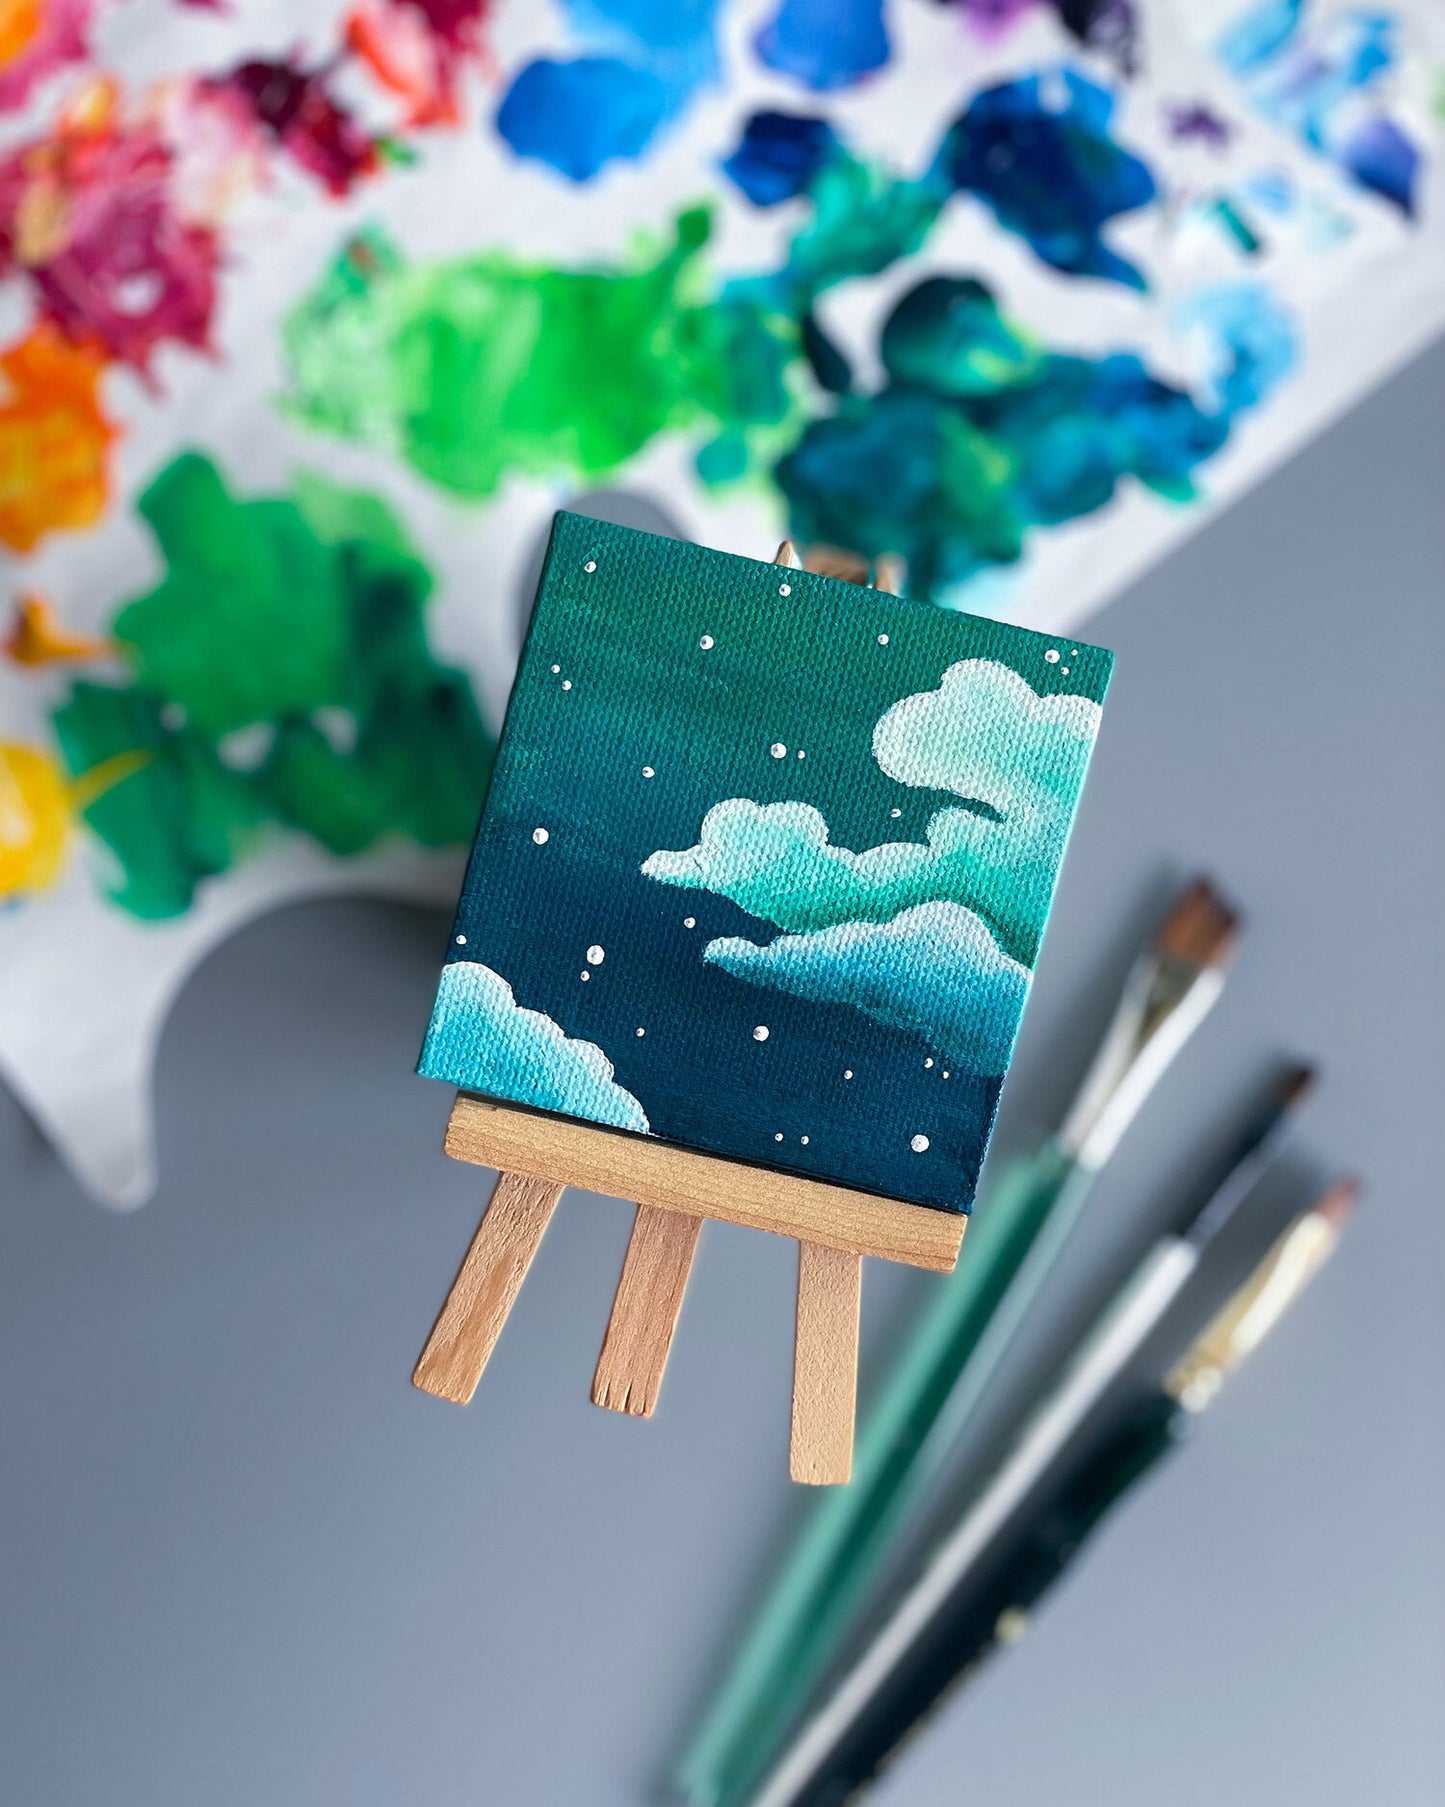 "Aquamarine Dreams" Mini-Painting with Easel